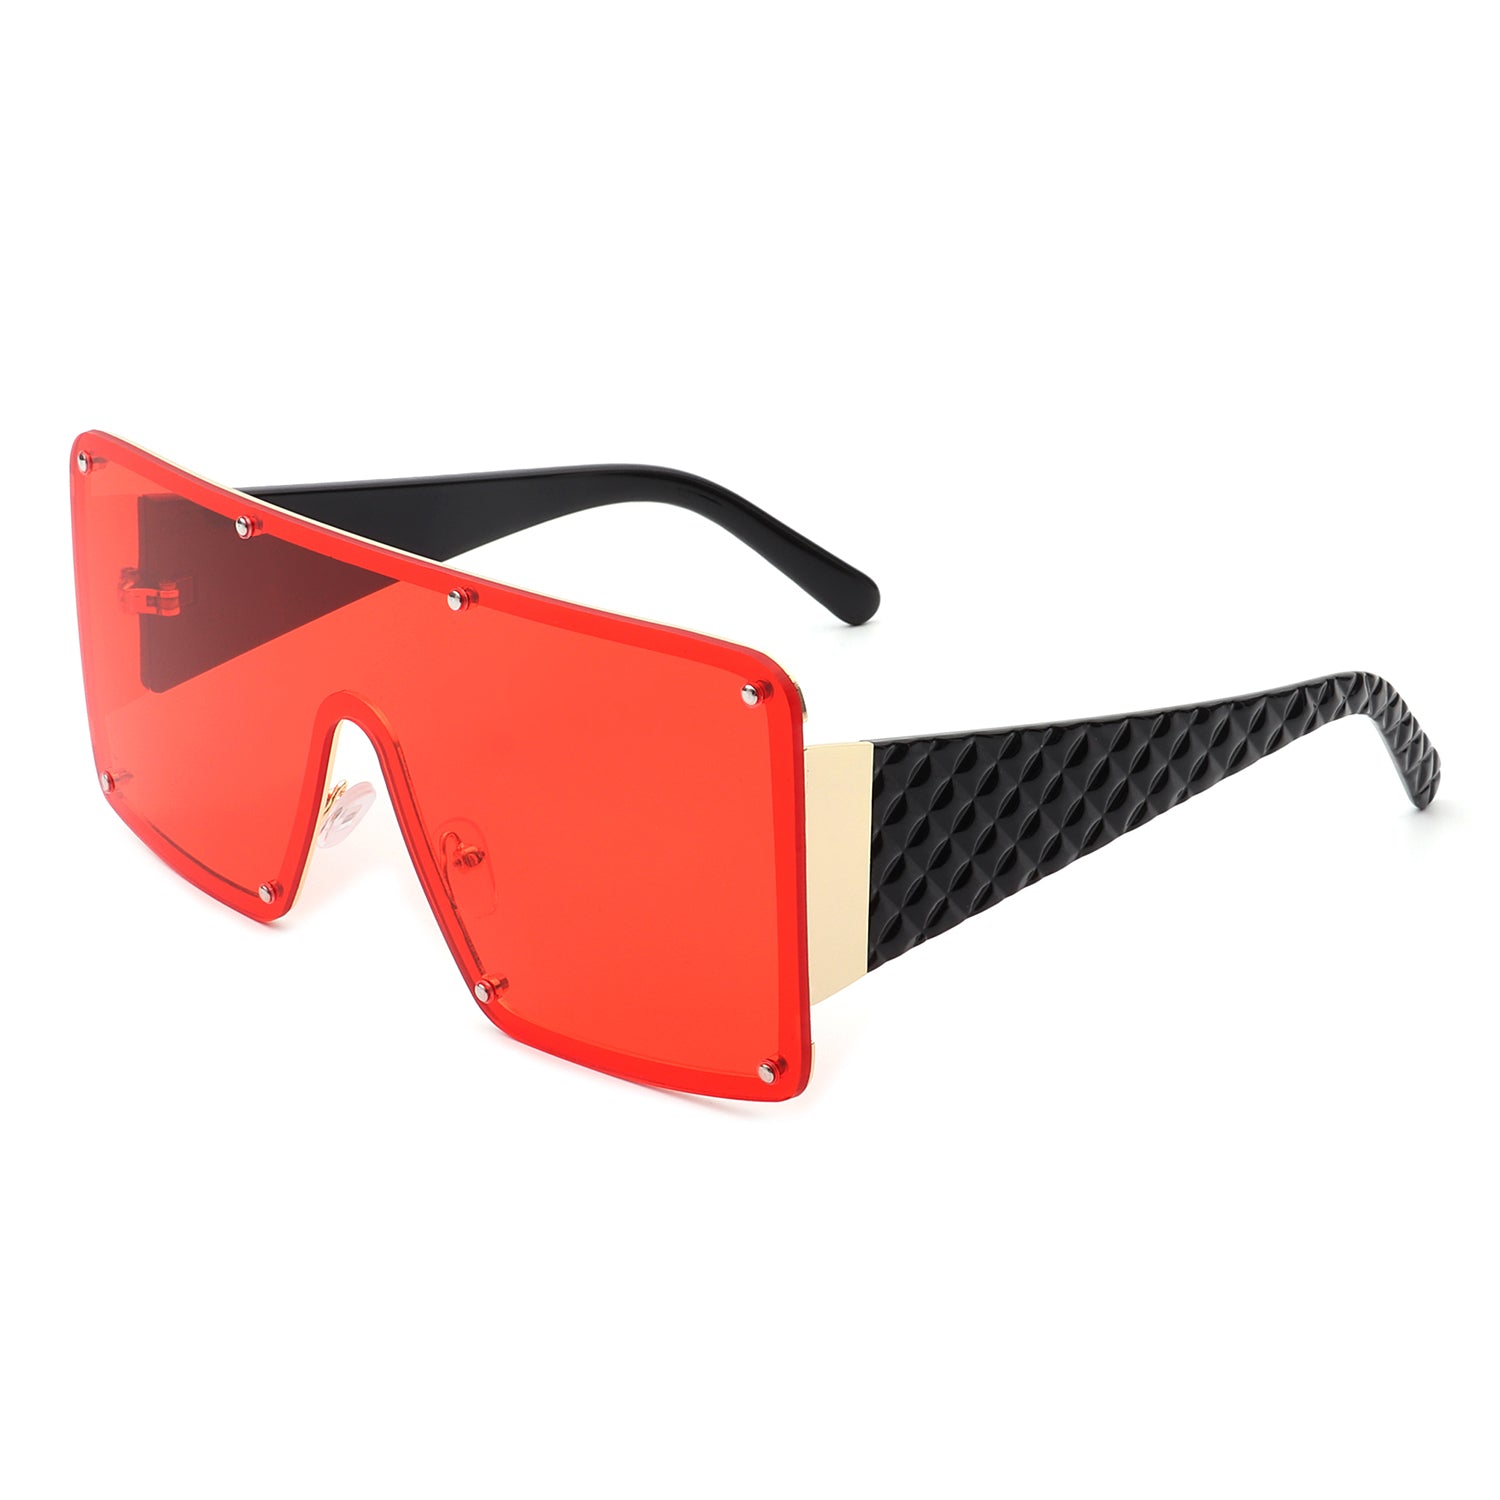 WAIMEA Square Large Sunglasses High Quality Unisex Fashion Brand Design  With Integrated Flat Top Z1583E From Uooy, $14.62